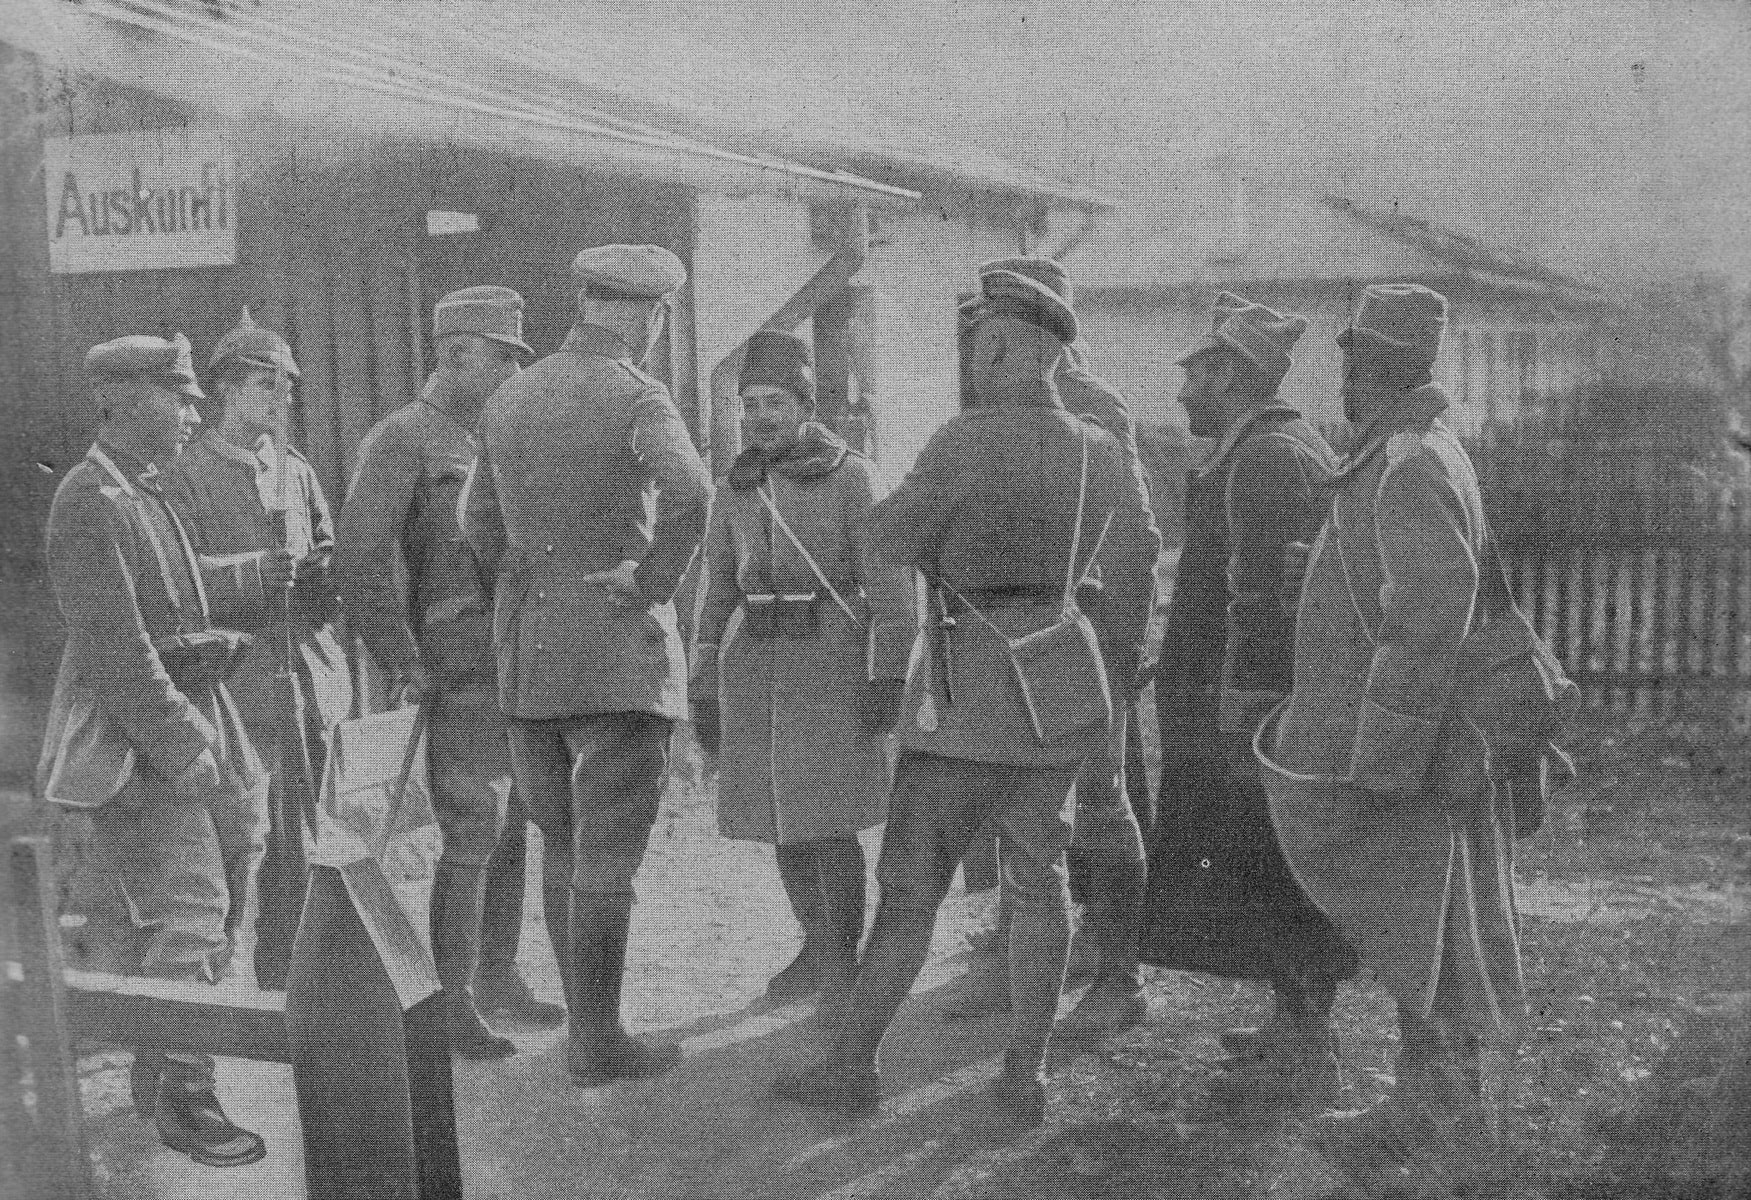 German and Austro-Hungarian officers interrogate a Romanian officer